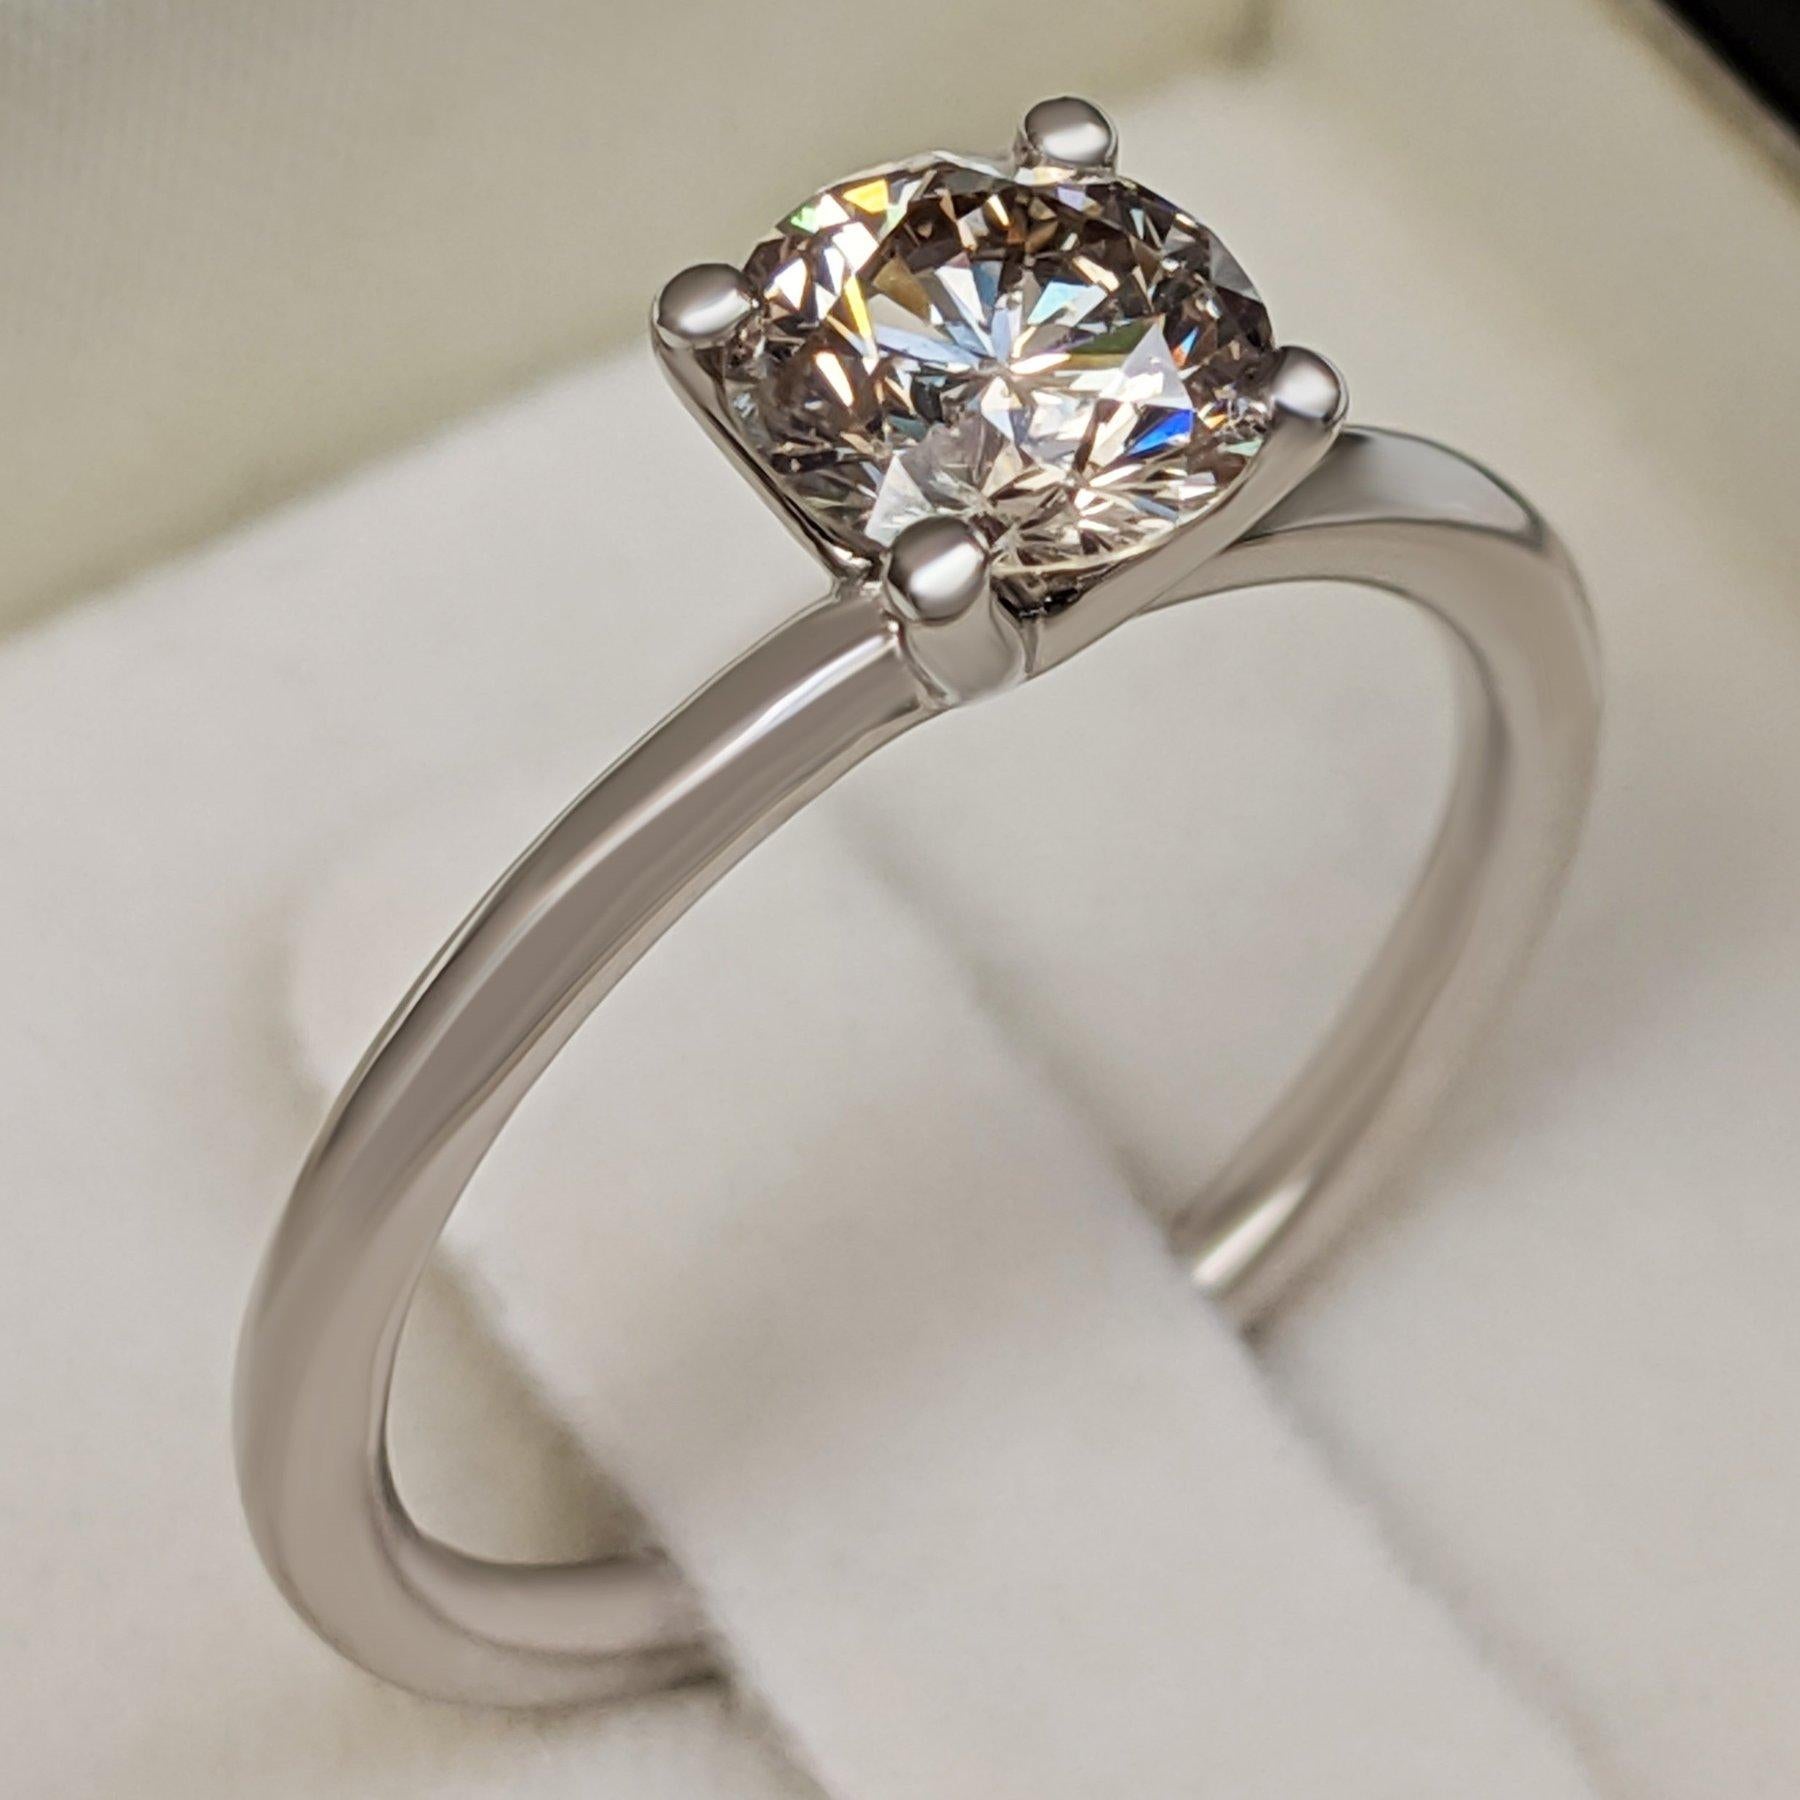 Ring can be sized free of charge prior to shipping out.
Ring size: 56 EU \  7.5 US

Center Stone:
___________
Natural Diamond
Cut: Round Brilliant
Carat: 1.06 carat
Color: J
Clarity: SI2

Item ships from Israeli Diamonds Exchange, customers are